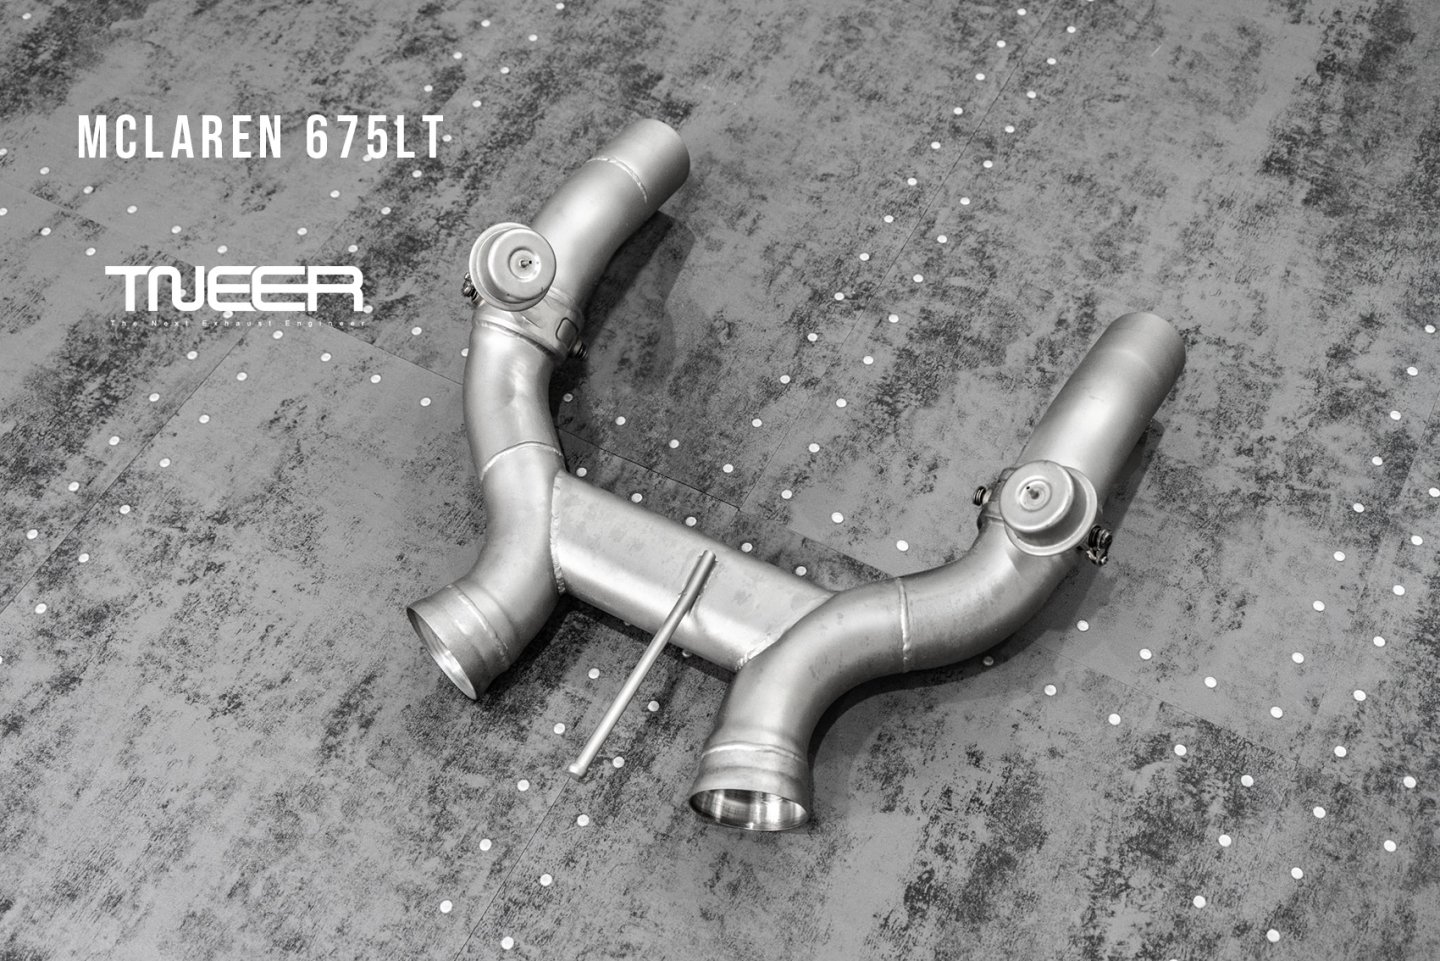 Mercedes-AMG C293 GLE63s TNEER Performance Exhaust System